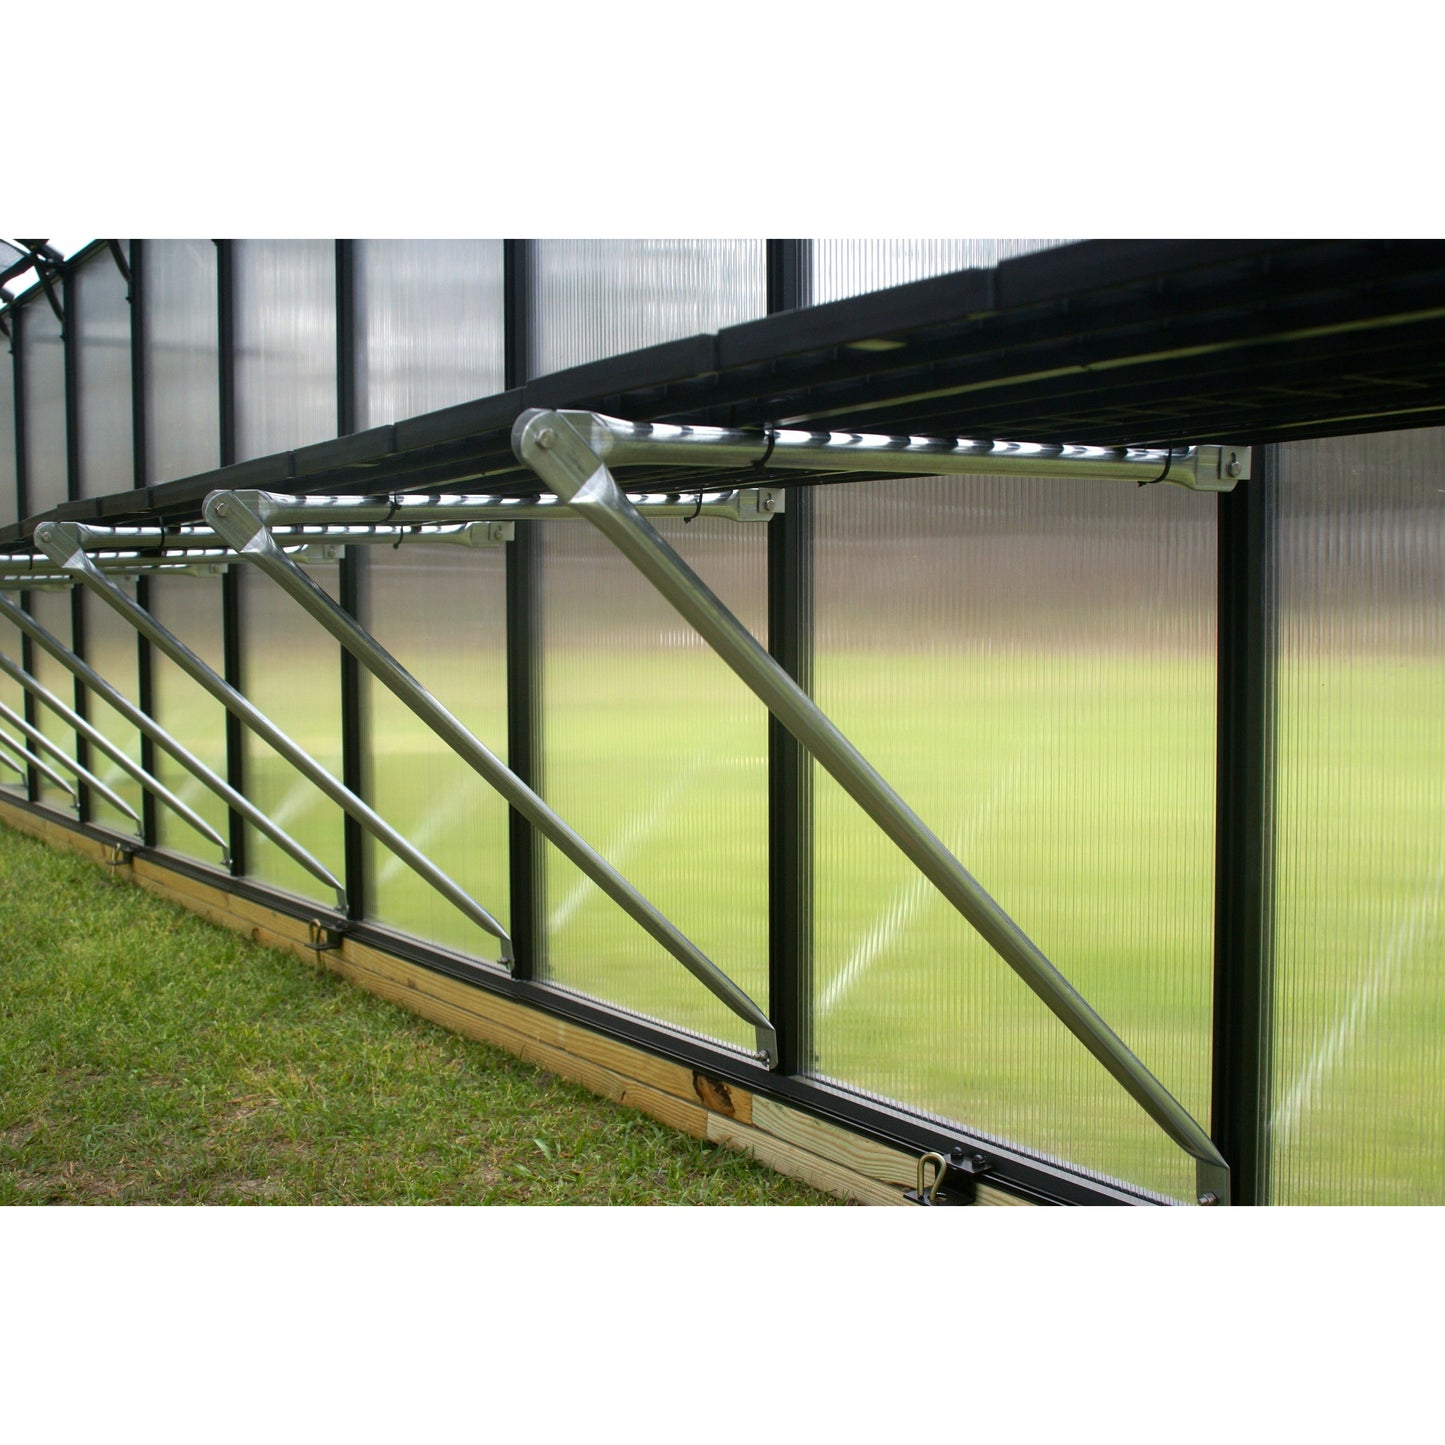 Mont Growers Edition Greenhouse 8FTx 24FT - Black Finish MONT-24-BK-GROWERS